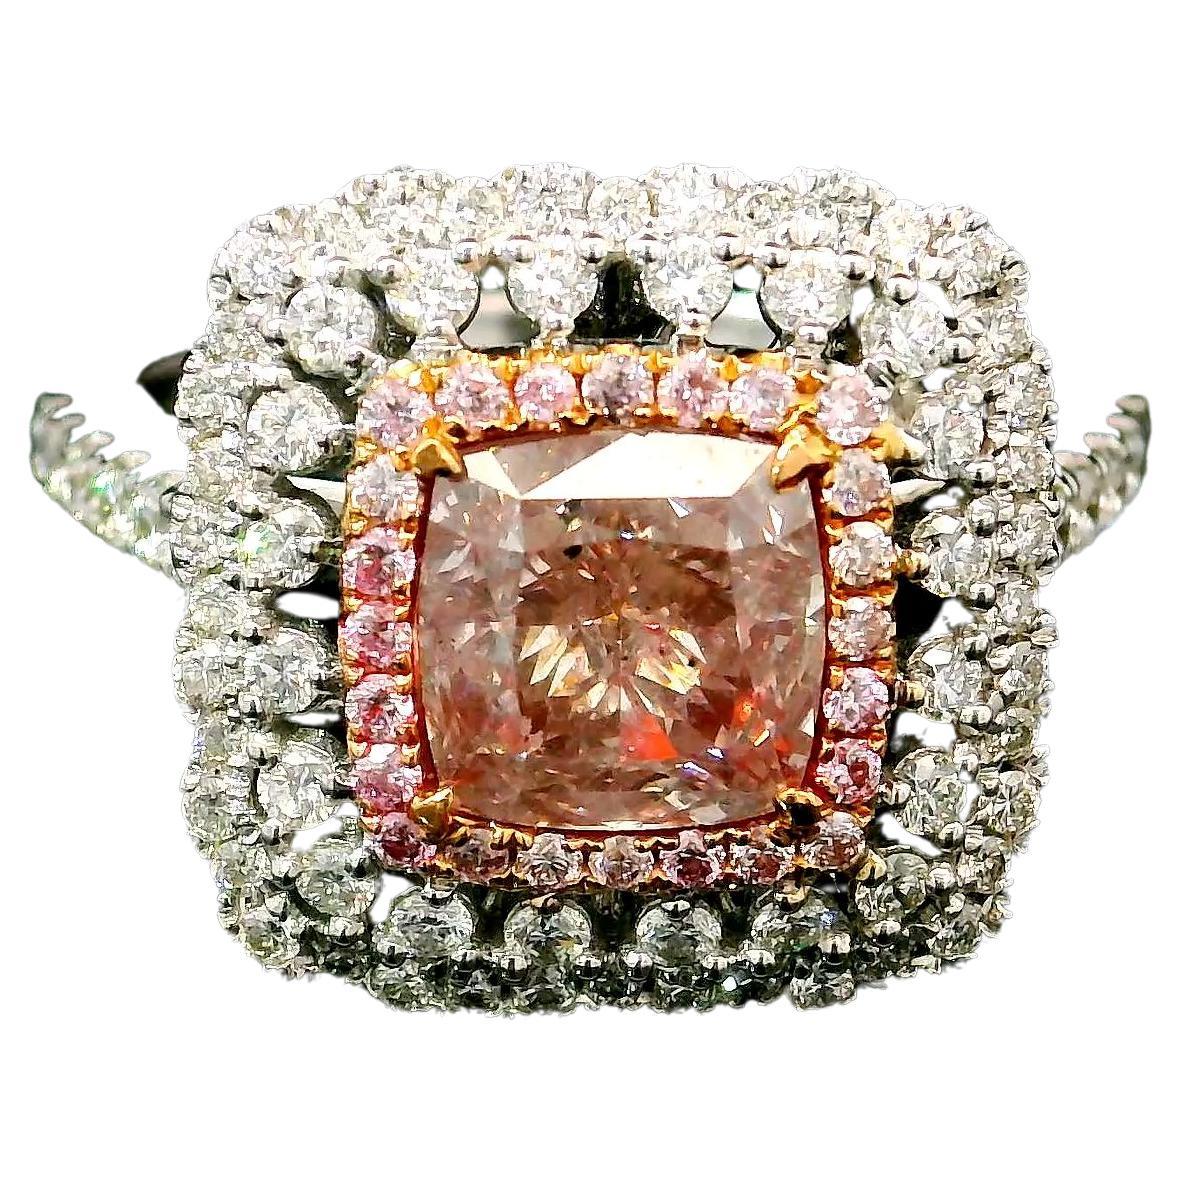 1.51 Carat Fancy Light Brownish Pink I1 Clarity GIA Certified